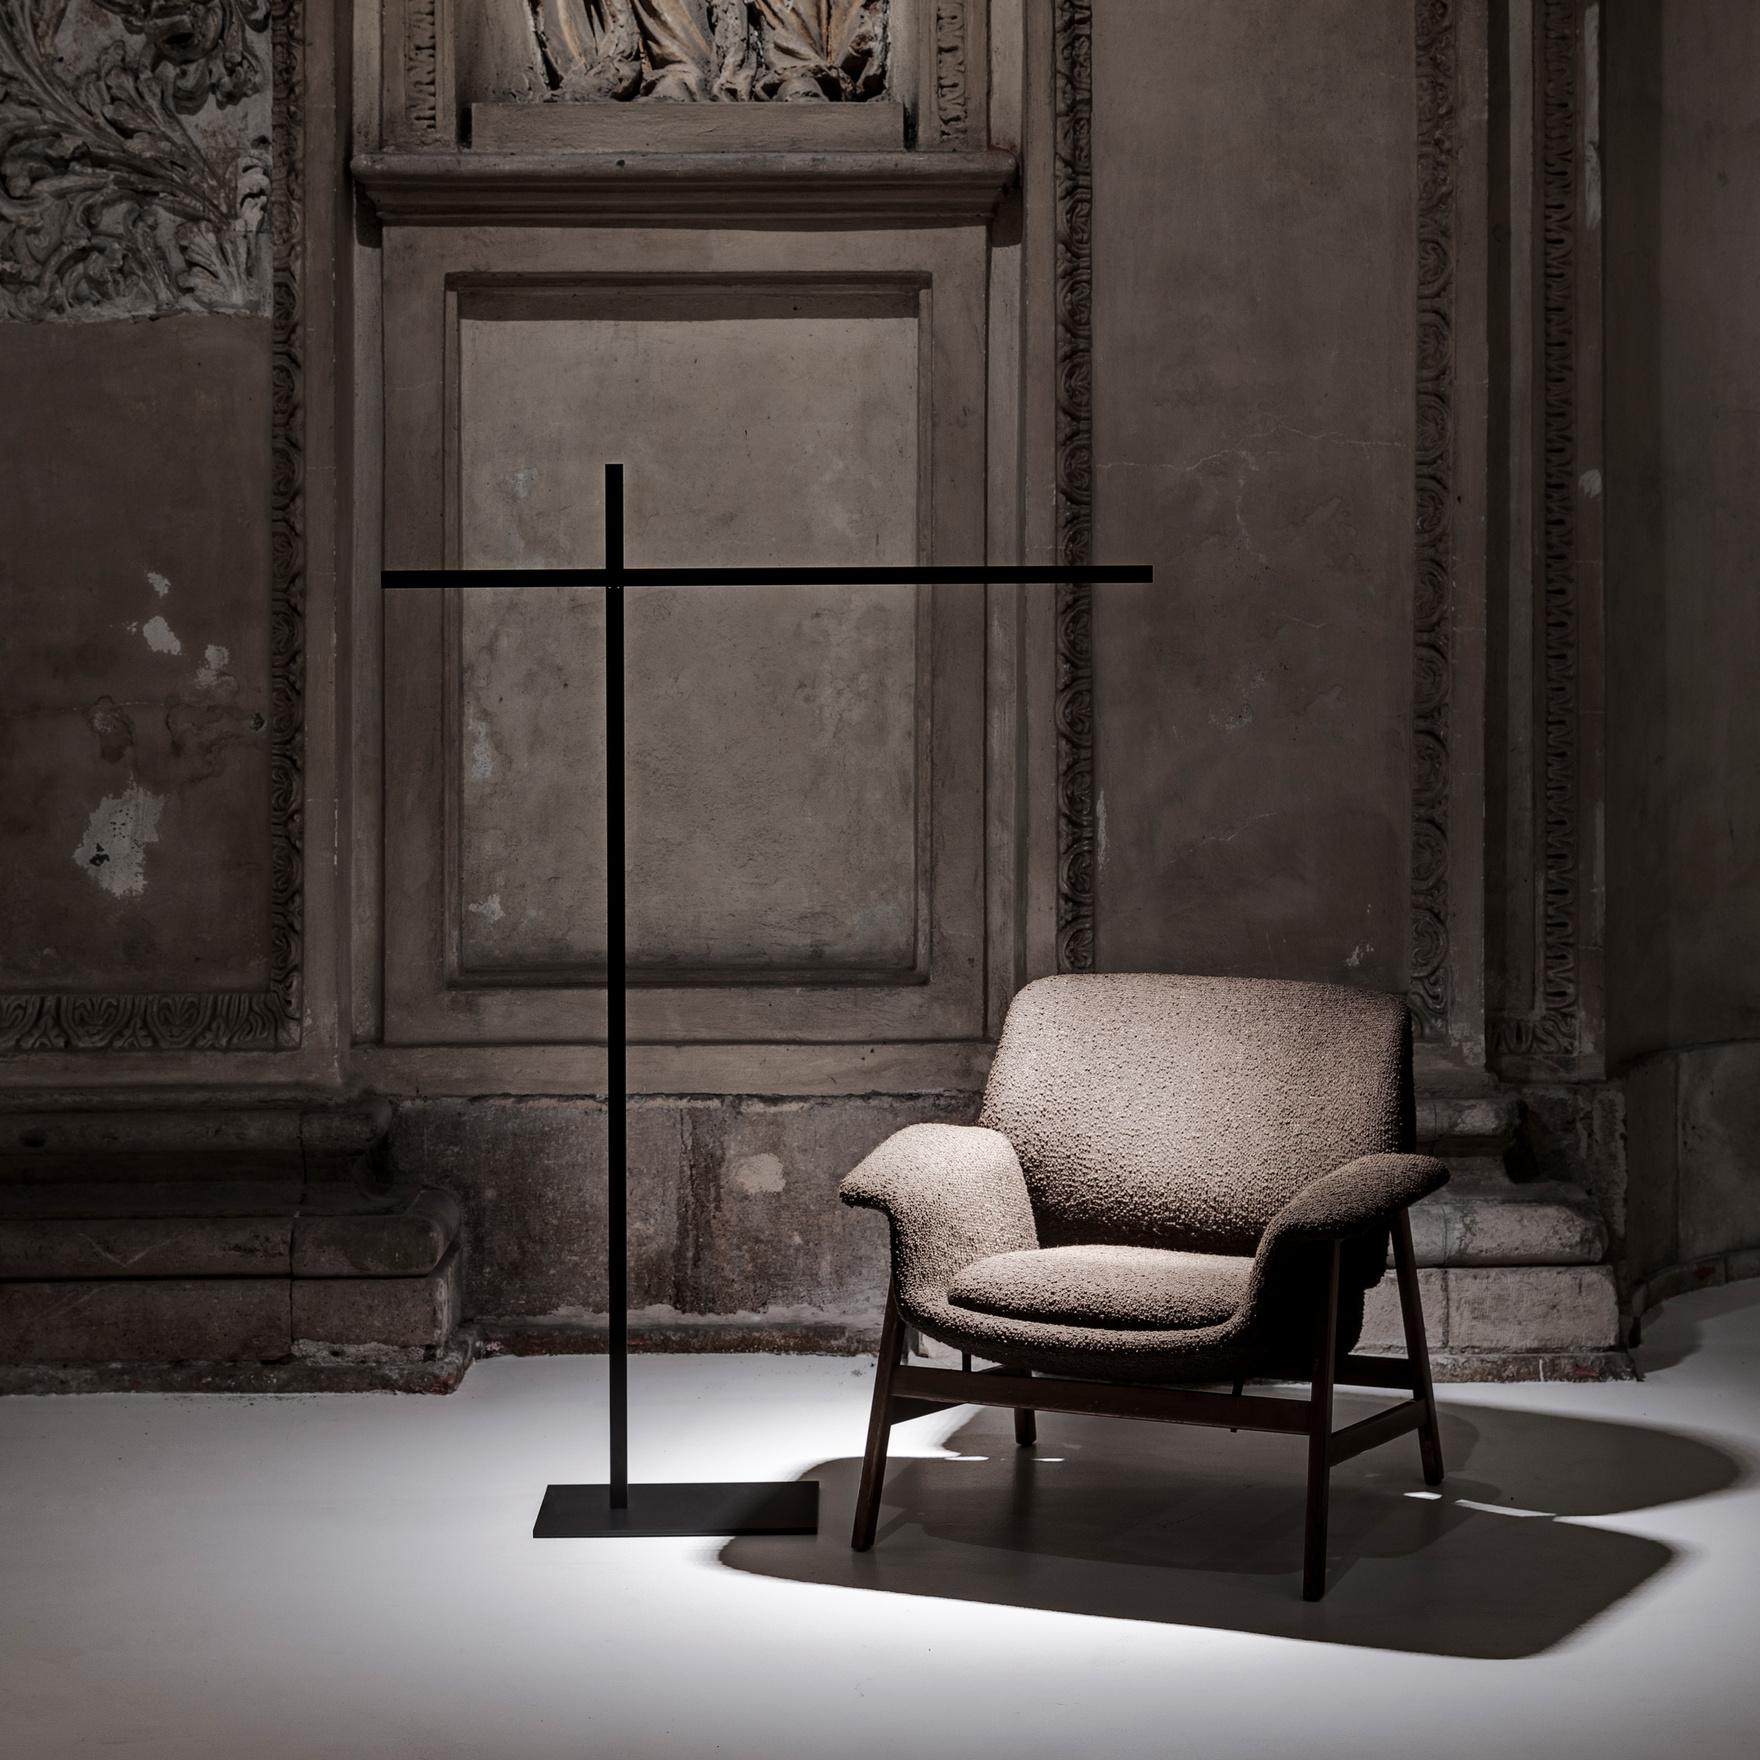 Davide Groppi HASHI floor lamp in Matt Black by Federico Delrosso In New Condition For Sale In Brooklyn, NY